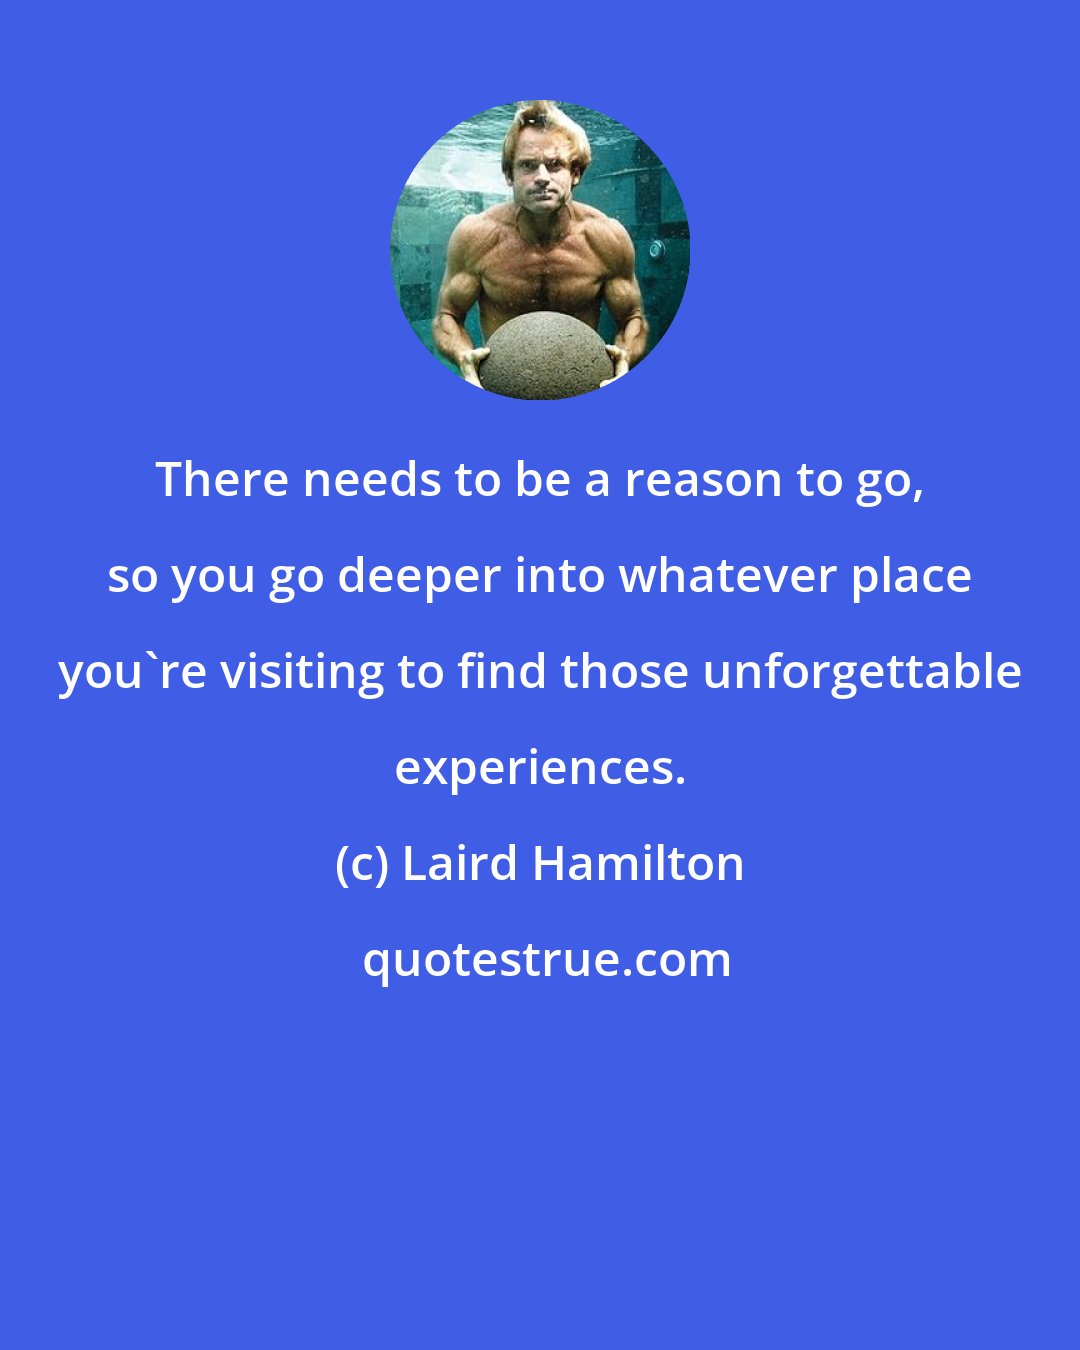 Laird Hamilton: There needs to be a reason to go, so you go deeper into whatever place you're visiting to find those unforgettable experiences.